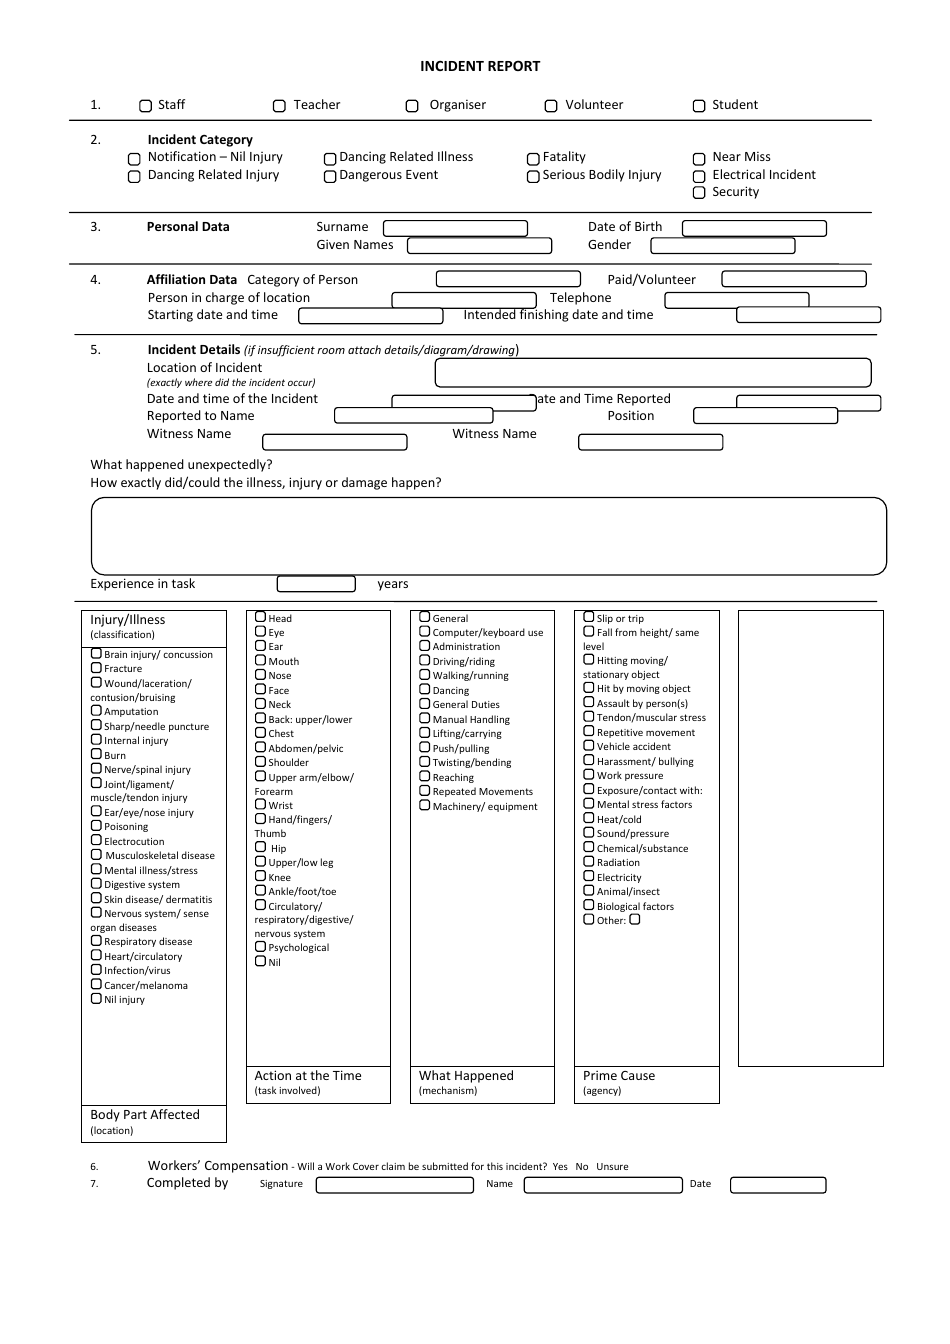 Incident Report Template - White, Page 1